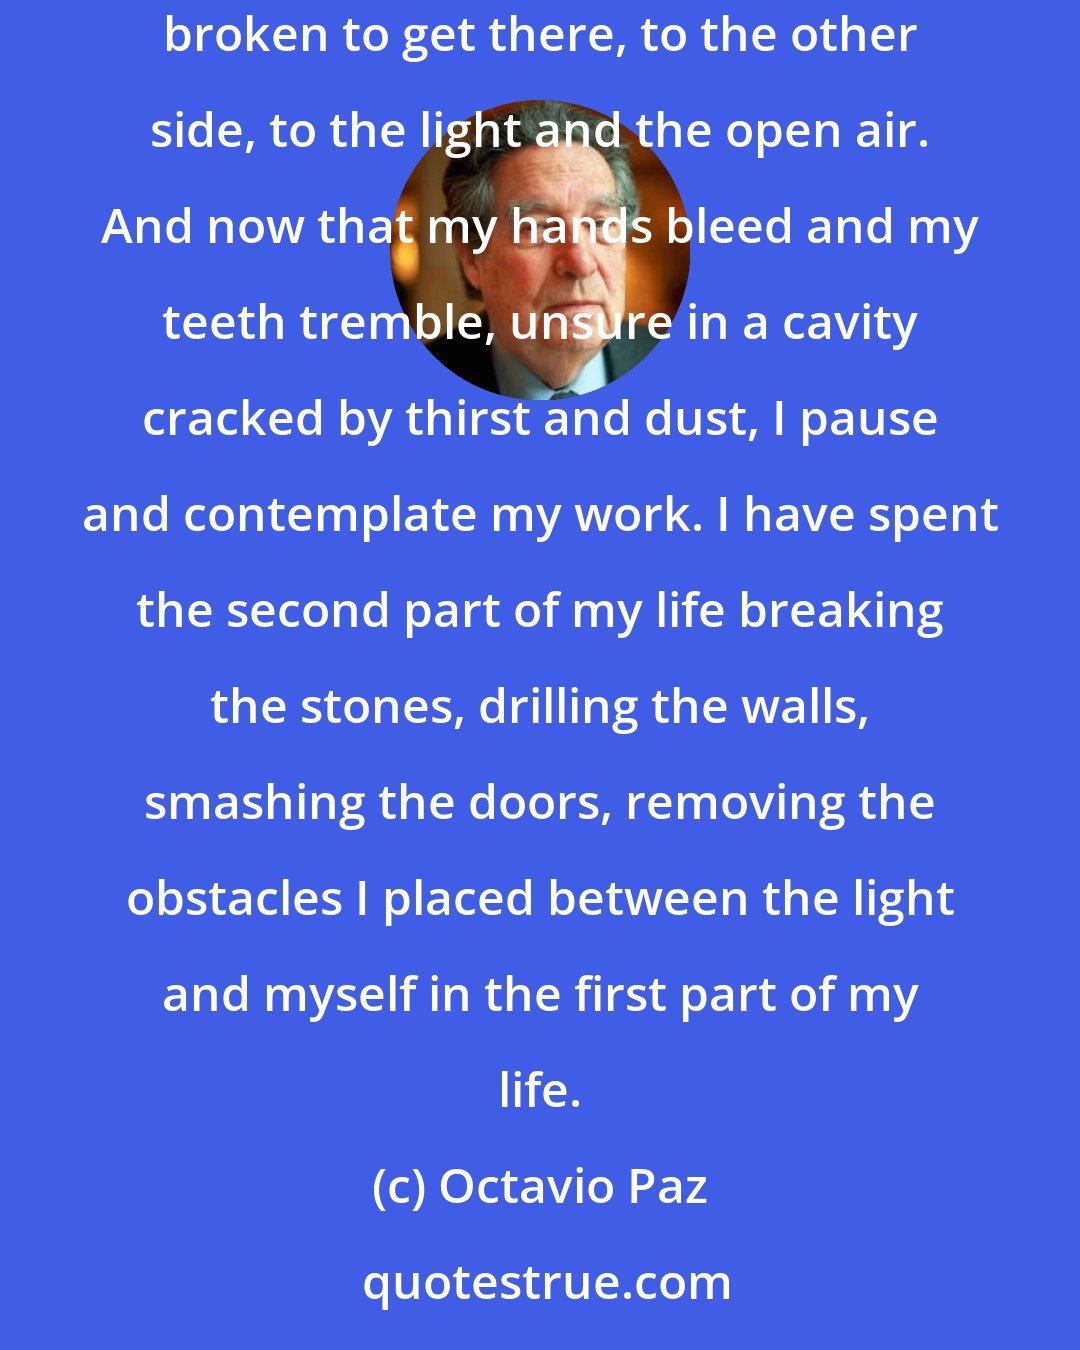 Octavio Paz: With great difficulty advancing by millimeters each year, I carve a road out of the rock. For millenniums my teeth have wasted and my nails broken to get there, to the other side, to the light and the open air. And now that my hands bleed and my teeth tremble, unsure in a cavity cracked by thirst and dust, I pause and contemplate my work. I have spent the second part of my life breaking the stones, drilling the walls, smashing the doors, removing the obstacles I placed between the light and myself in the first part of my life.